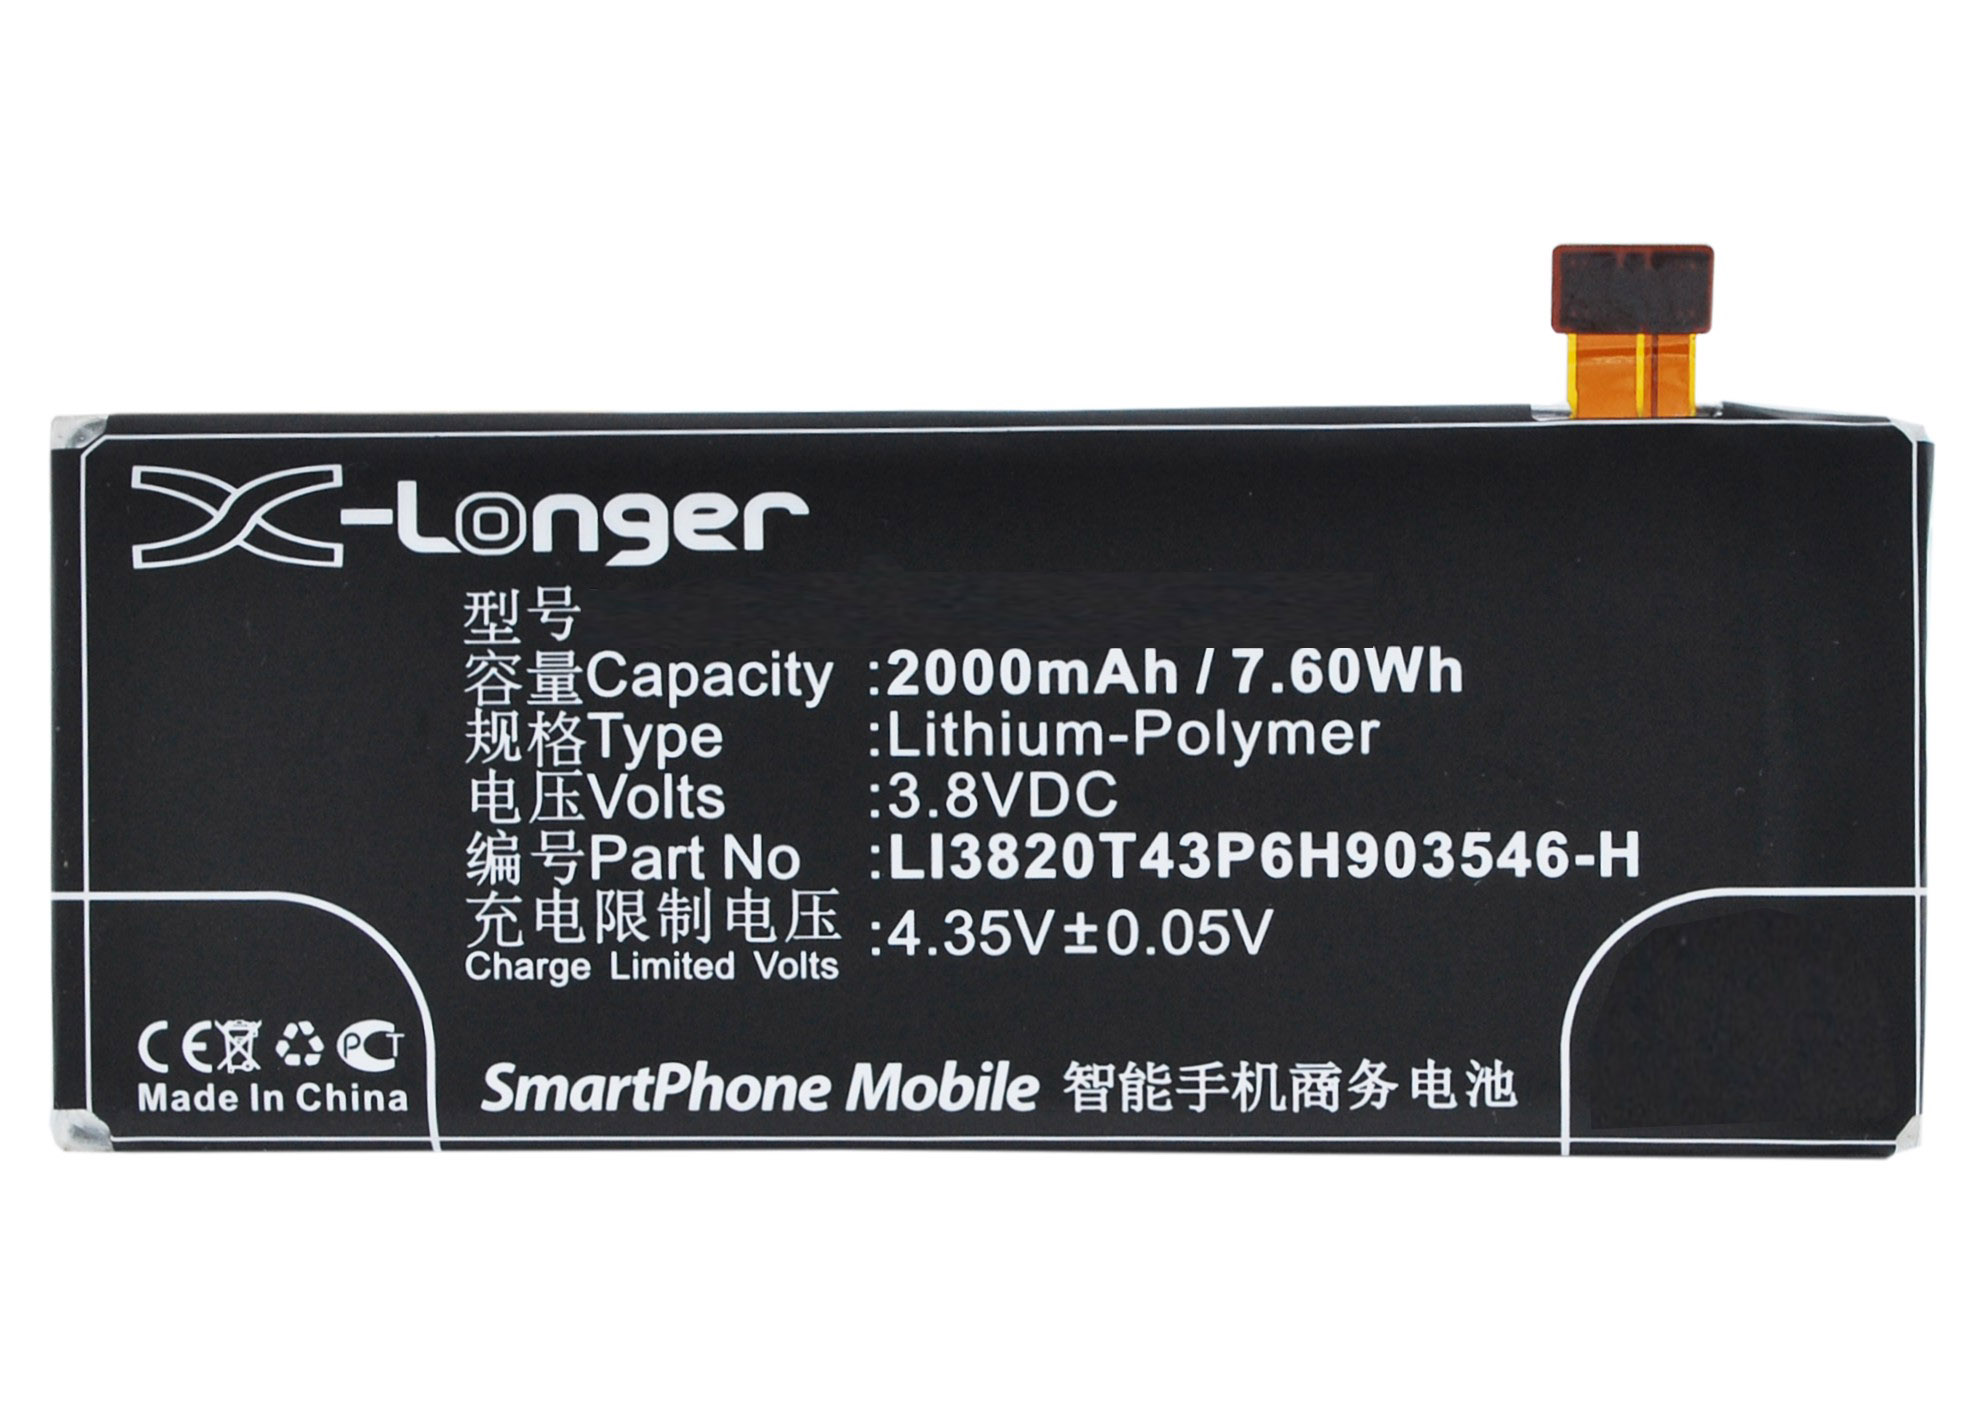 Synergy Digital Battery Compatible With AT&T LI3720T43P6H903546 Cellphone Battery - (Li-Pol, 3.8V, 2000 mAh / 7.60Wh)